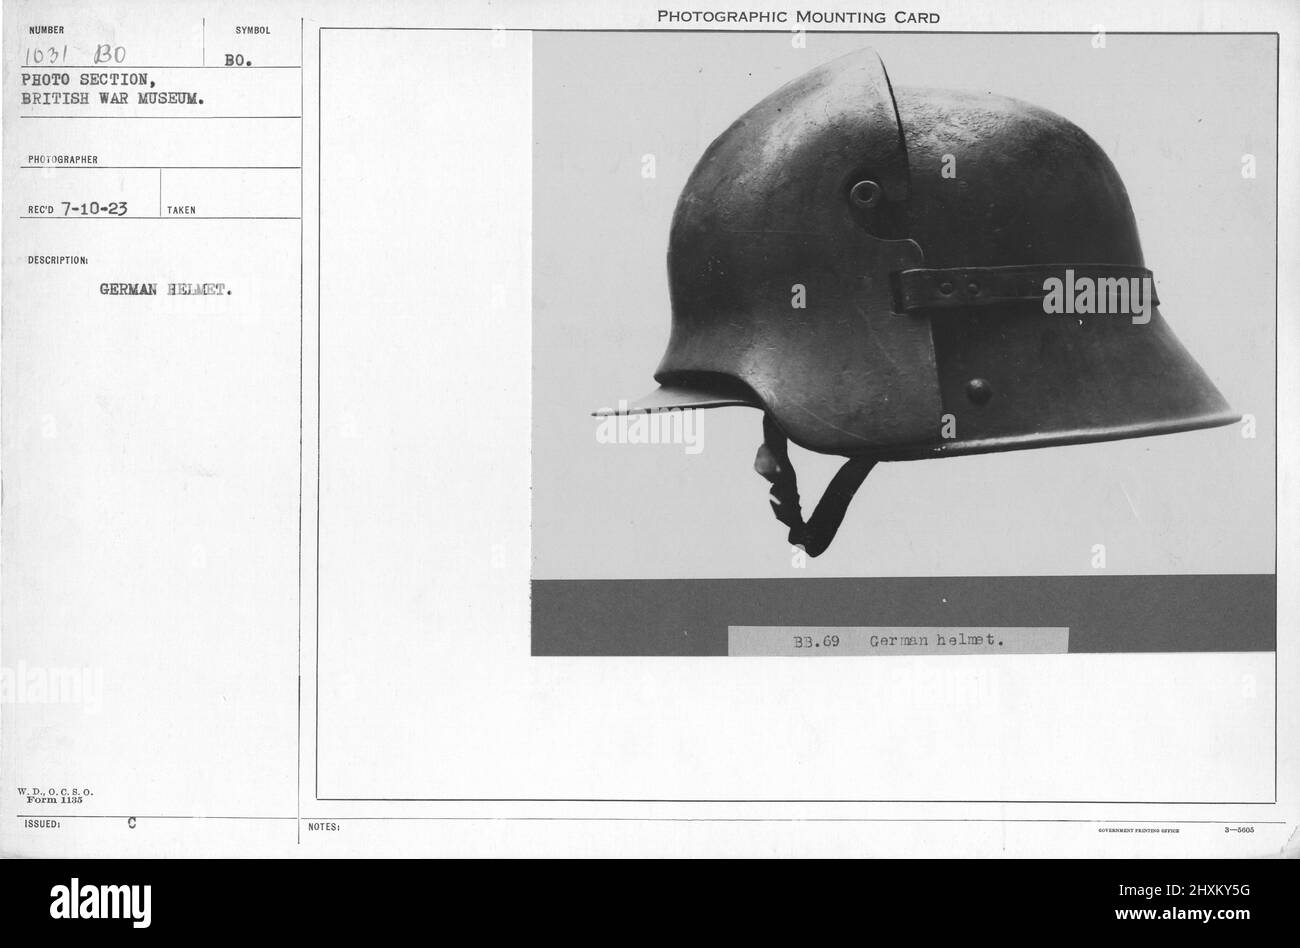 German helmet. Collection of World War I Photographs, 1914-1918 that depict the military activities of British and other nation's armed forces and personnel during World War I. Stock Photo